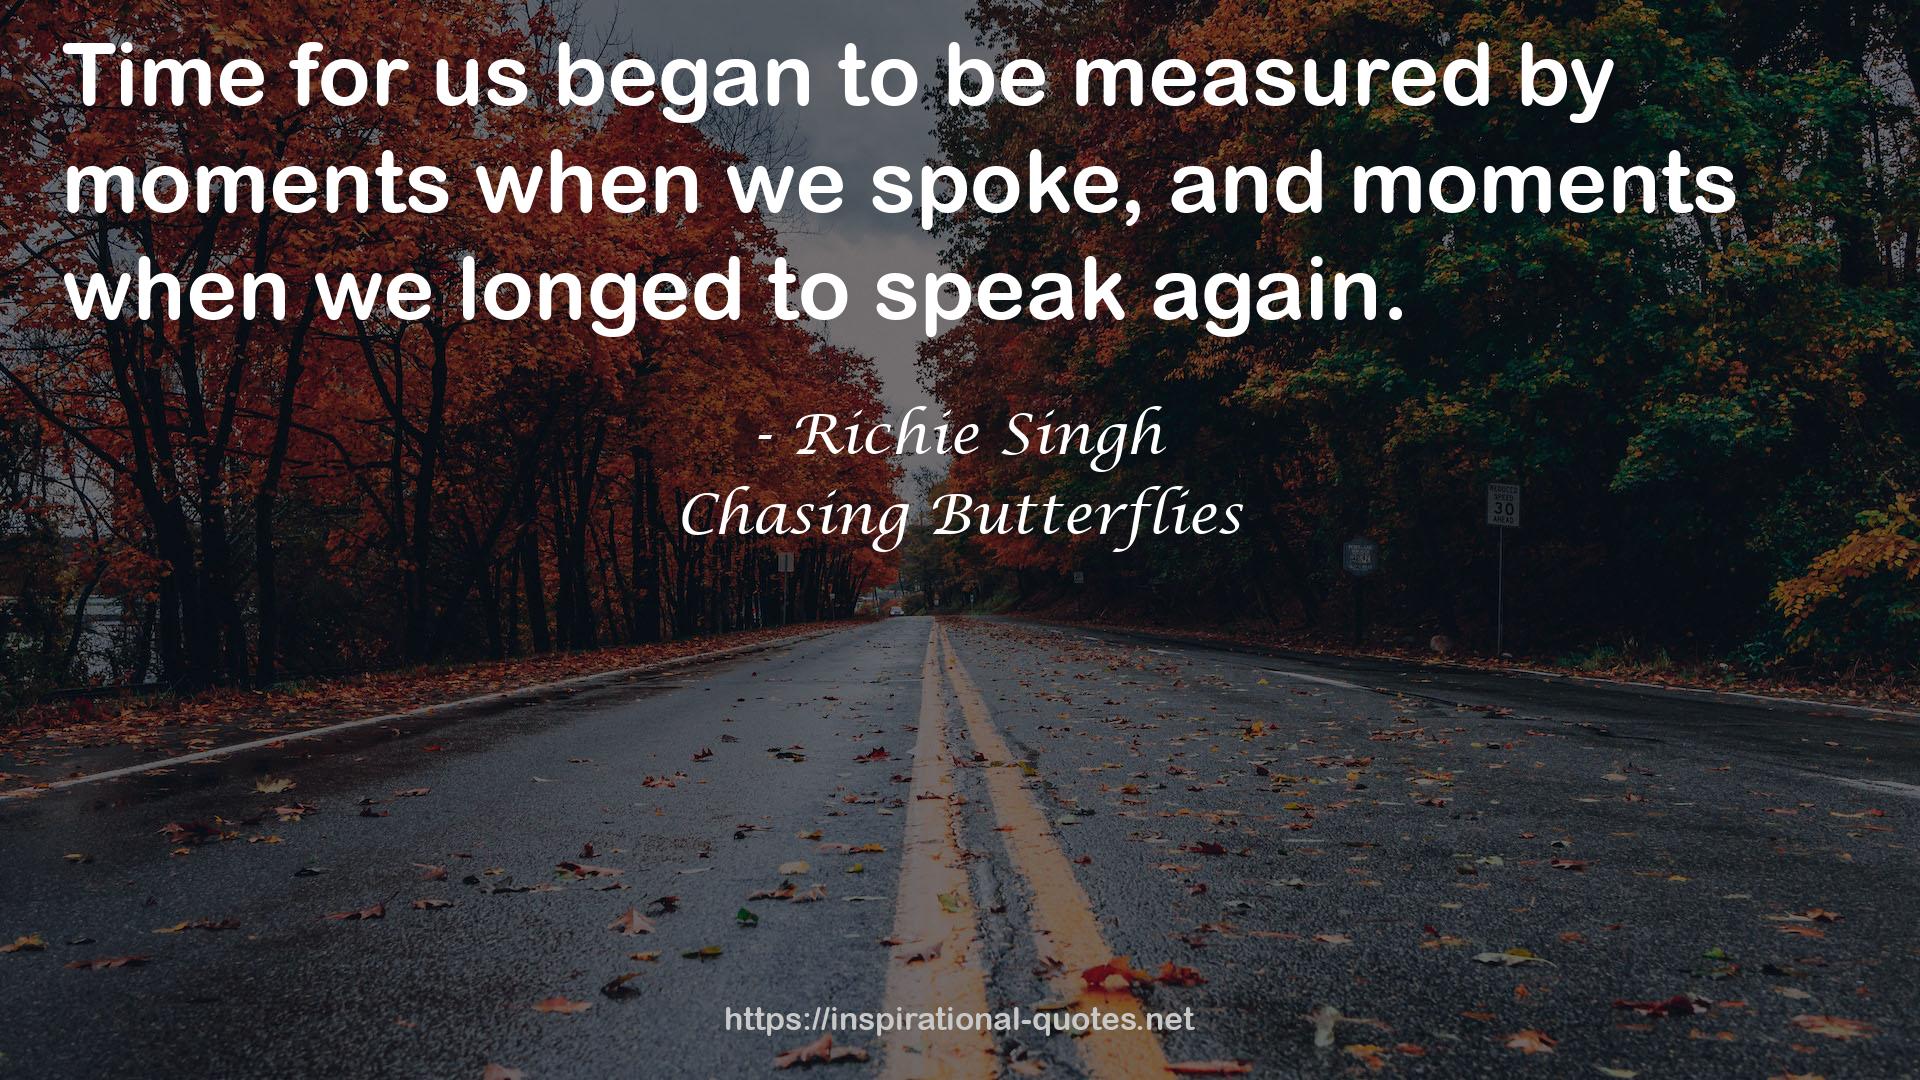 Chasing Butterflies QUOTES